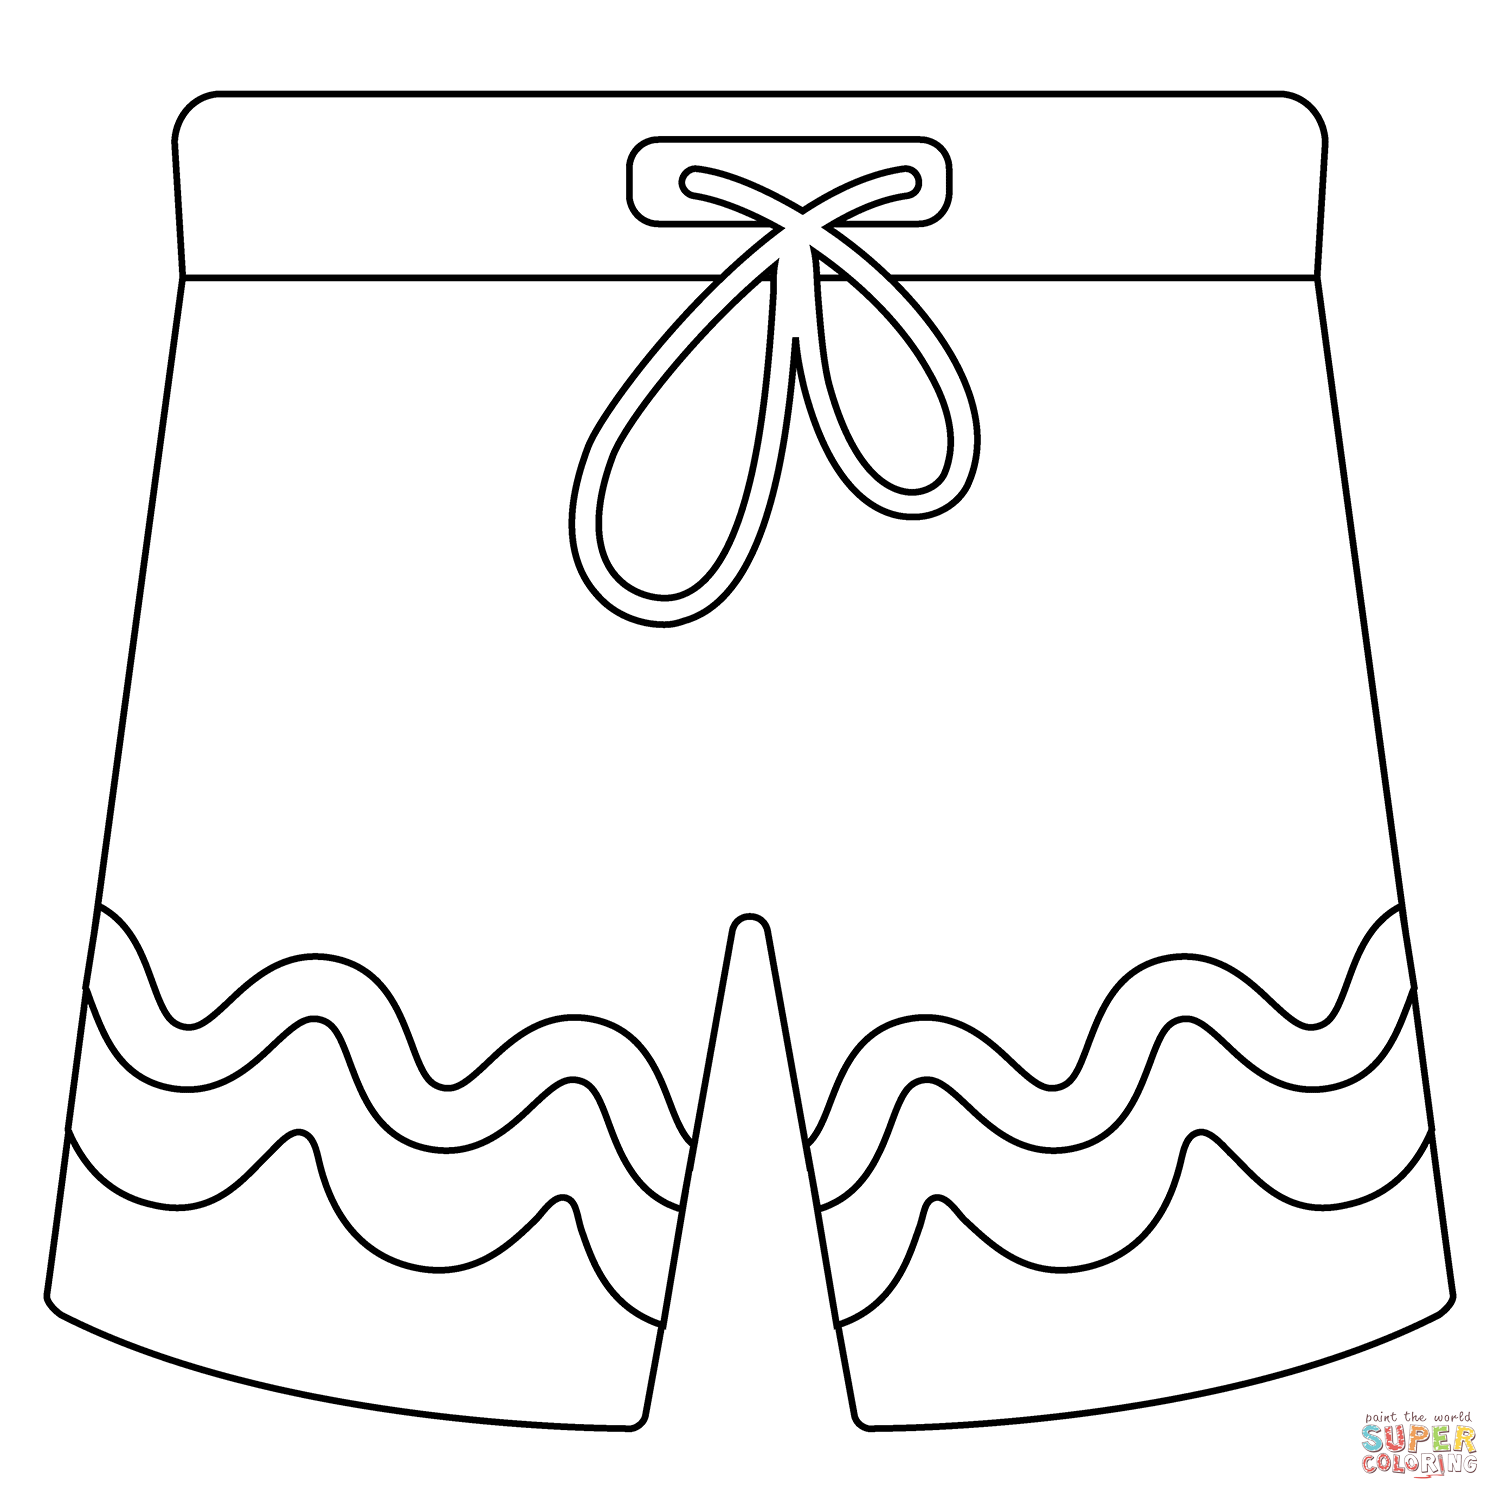 Shorts emoji coloring page free printable coloring pages